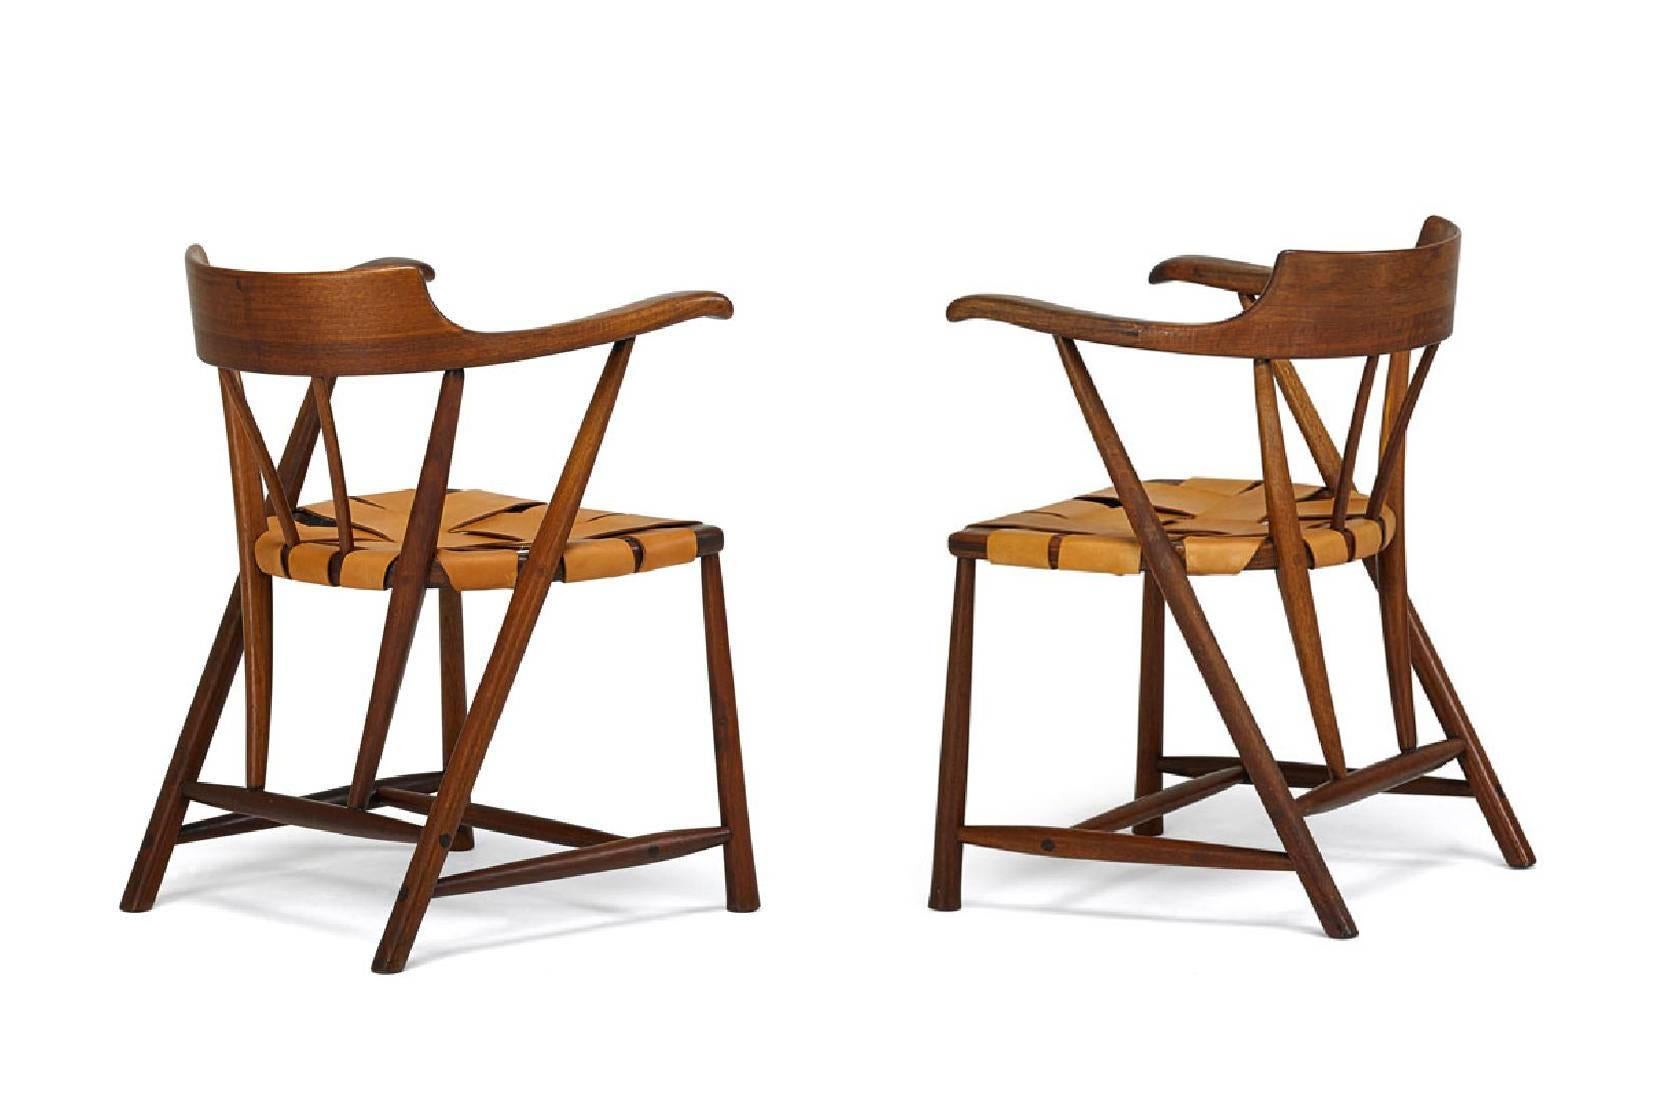 Handmade in his studio in Paoli PA in 1951, by one of the most celebrated American artist and woodworker Wharton Esherick (1887-1970), the pair of 